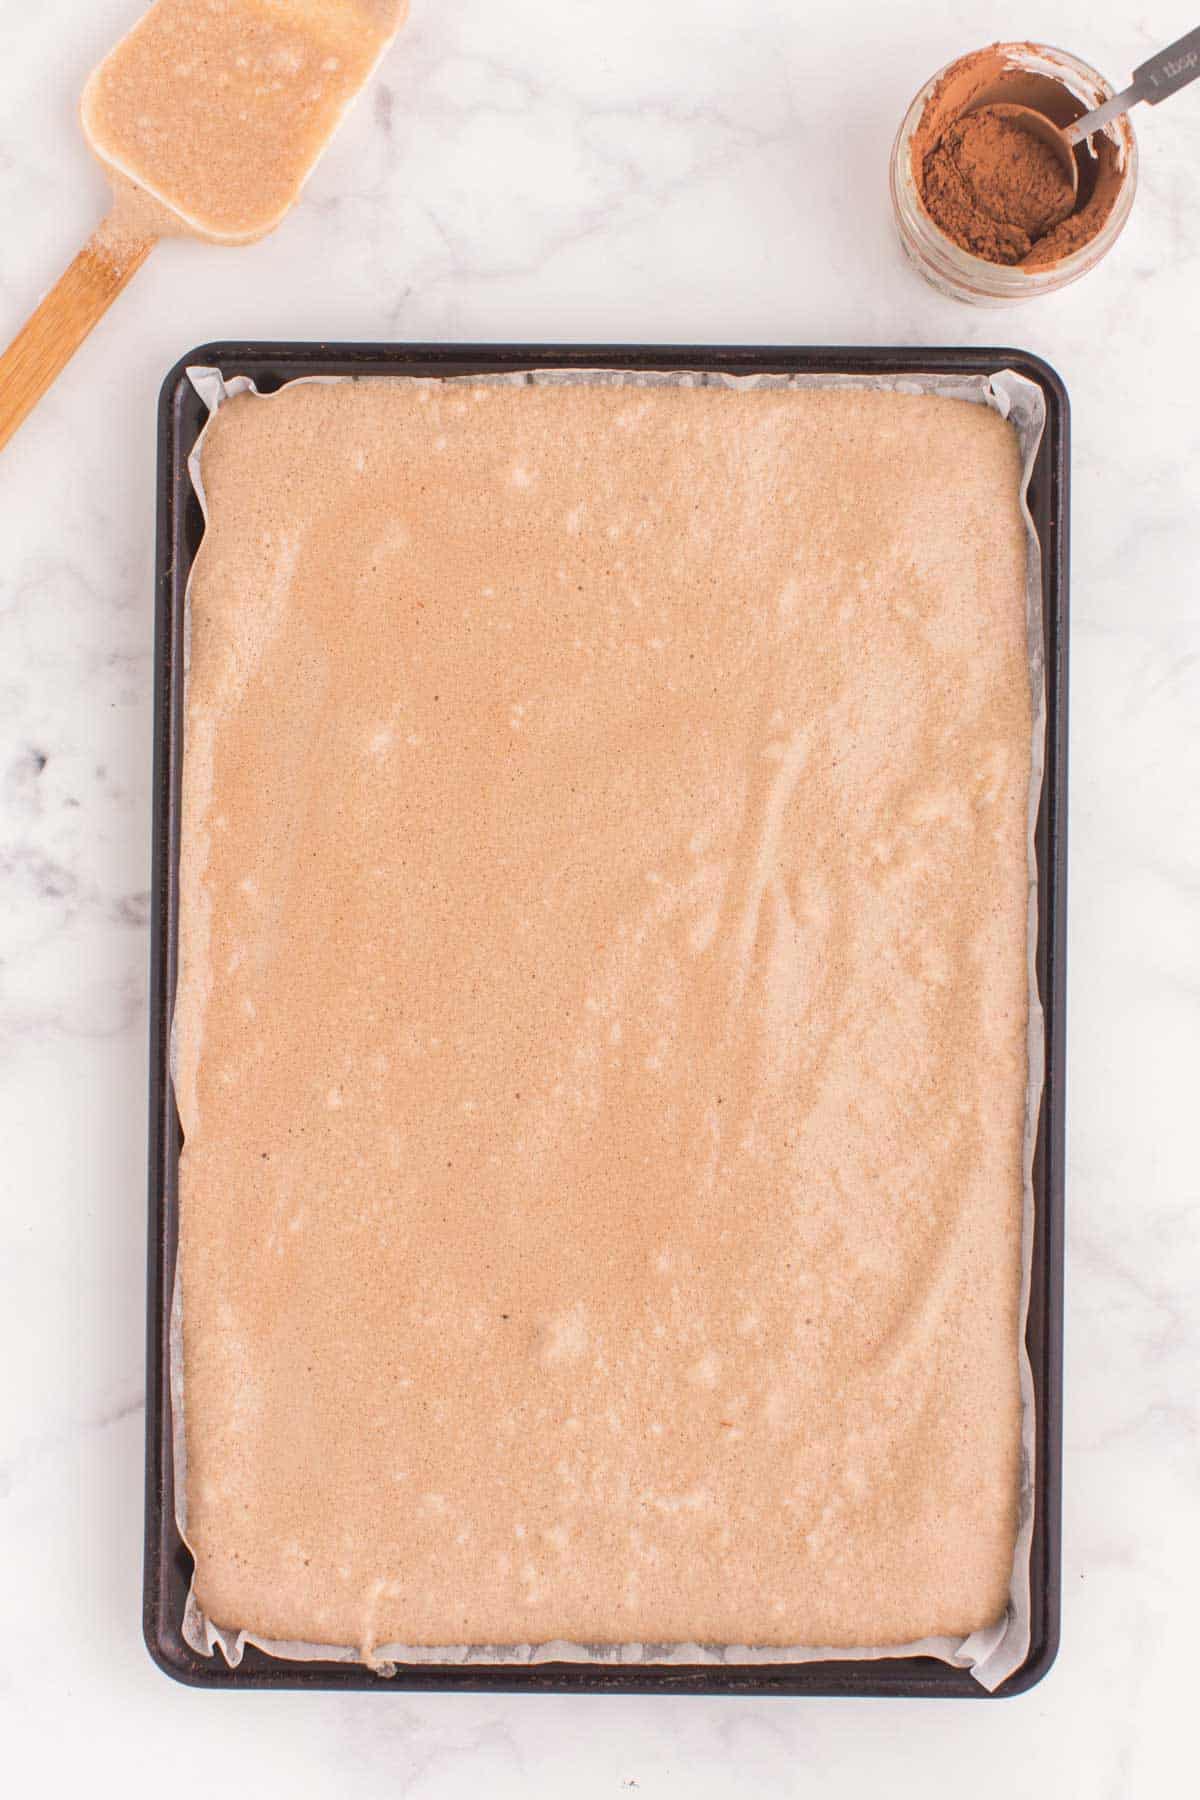 Cake batter spread into a jelly roll pan